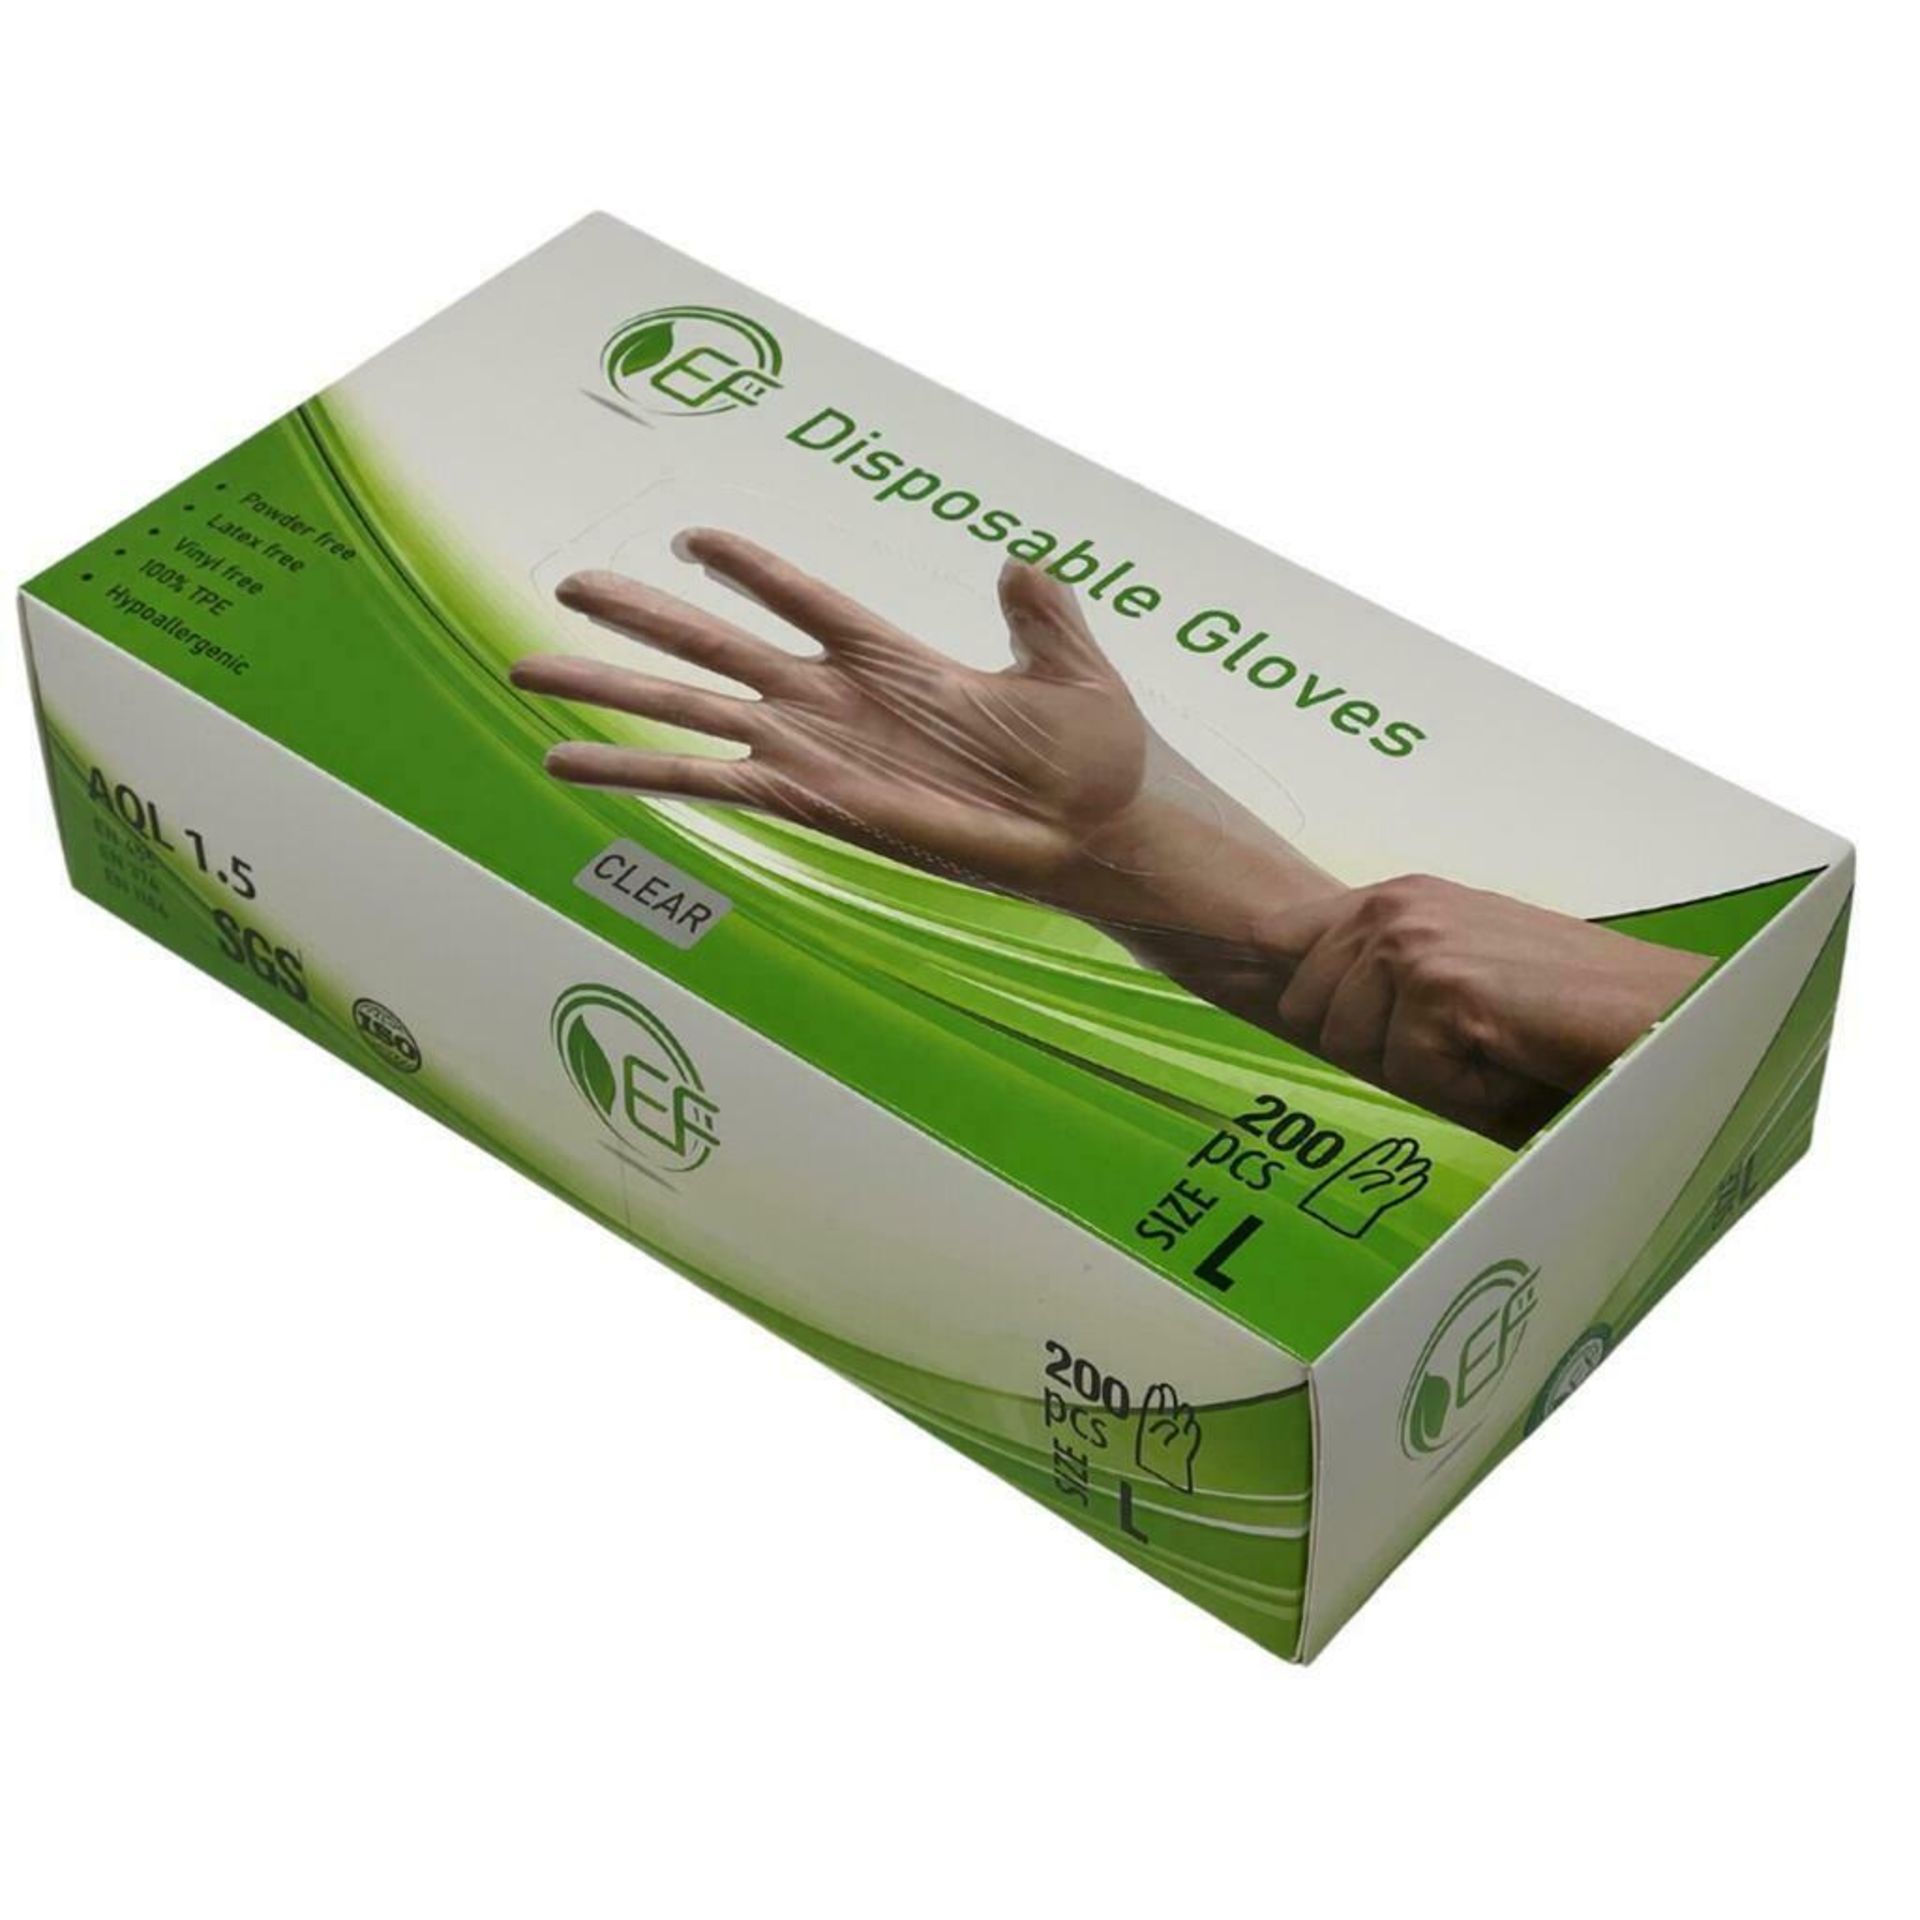 PALLET TO CONTAIN 1050 X BRAND NEW PACKS OF 200 CLEAR TPE GLOVES SIZE LARGE EXPIRES 2026